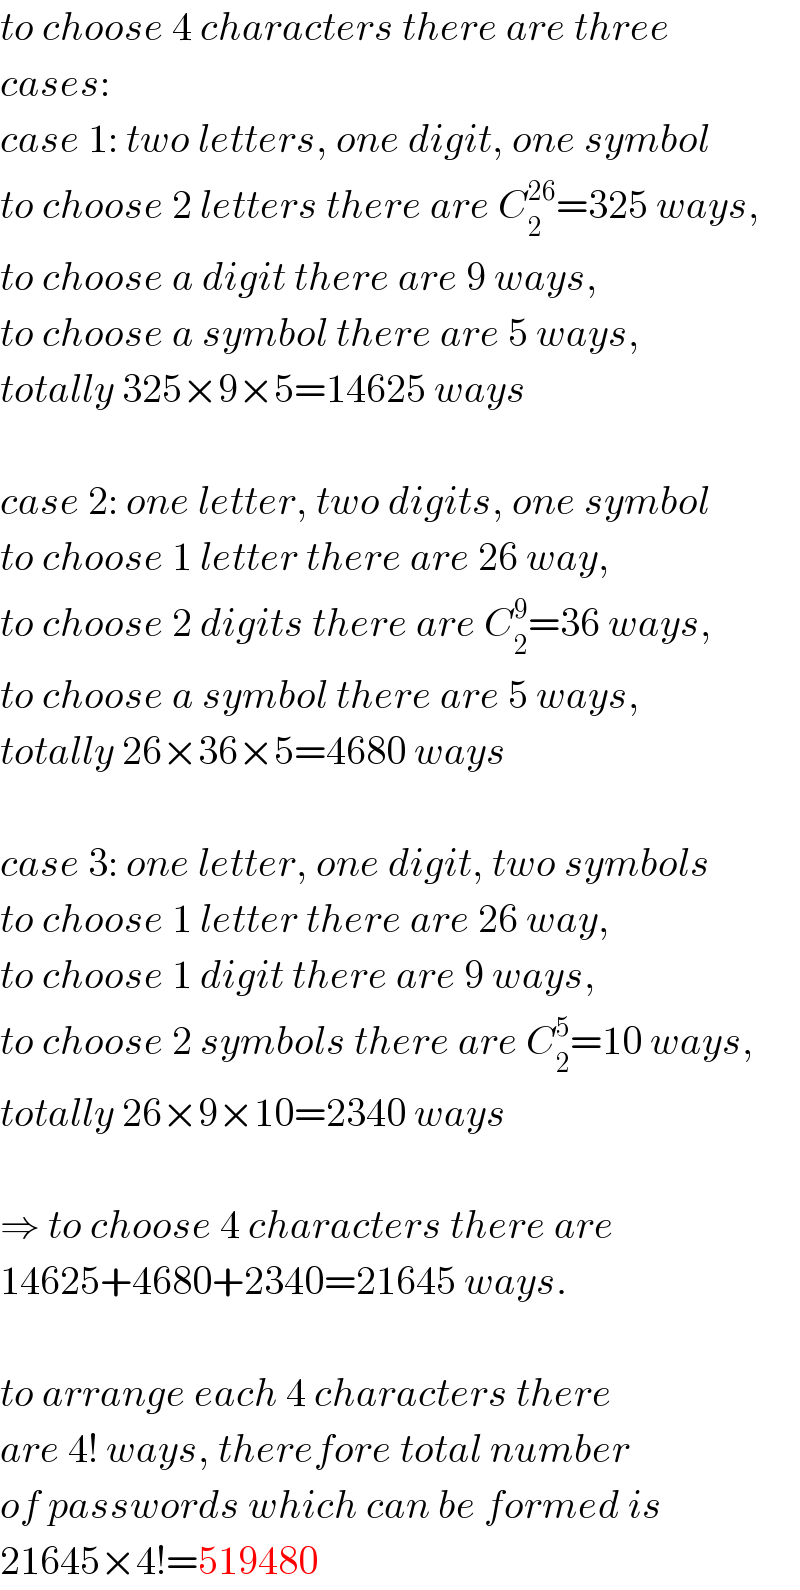 to choose 4 characters there are three  cases:  case 1: two letters, one digit, one symbol  to choose 2 letters there are C_2 ^(26) =325 ways,  to choose a digit there are 9 ways,  to choose a symbol there are 5 ways,  totally 325×9×5=14625 ways    case 2: one letter, two digits, one symbol  to choose 1 letter there are 26 way,  to choose 2 digits there are C_2 ^9 =36 ways,  to choose a symbol there are 5 ways,  totally 26×36×5=4680 ways    case 3: one letter, one digit, two symbols  to choose 1 letter there are 26 way,  to choose 1 digit there are 9 ways,  to choose 2 symbols there are C_2 ^5 =10 ways,  totally 26×9×10=2340 ways    ⇒ to choose 4 characters there are  14625+4680+2340=21645 ways.    to arrange each 4 characters there  are 4! ways, therefore total number  of passwords which can be formed is  21645×4!=519480  